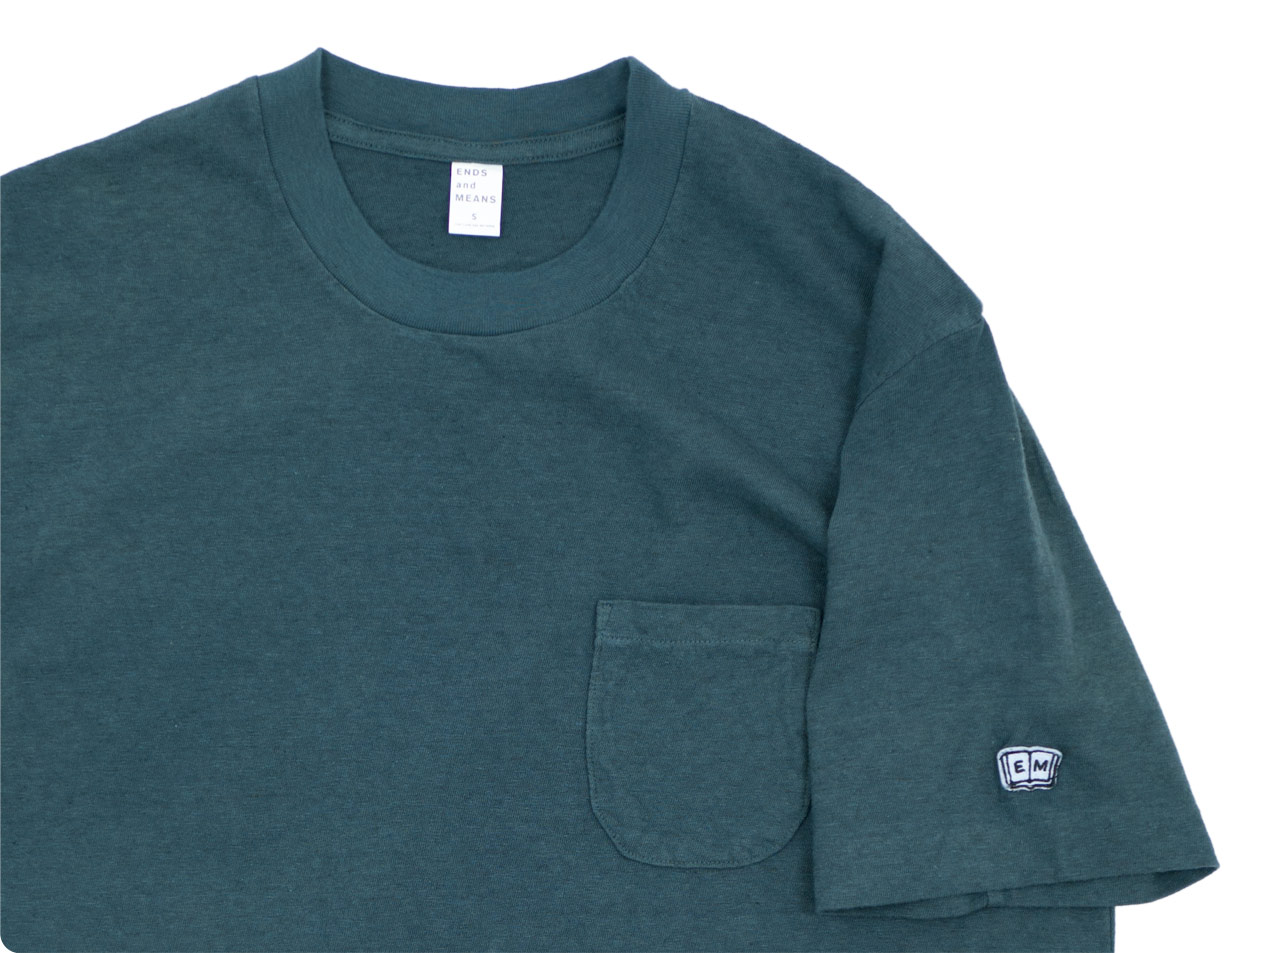 ENDS and MEANS Pocket Tee